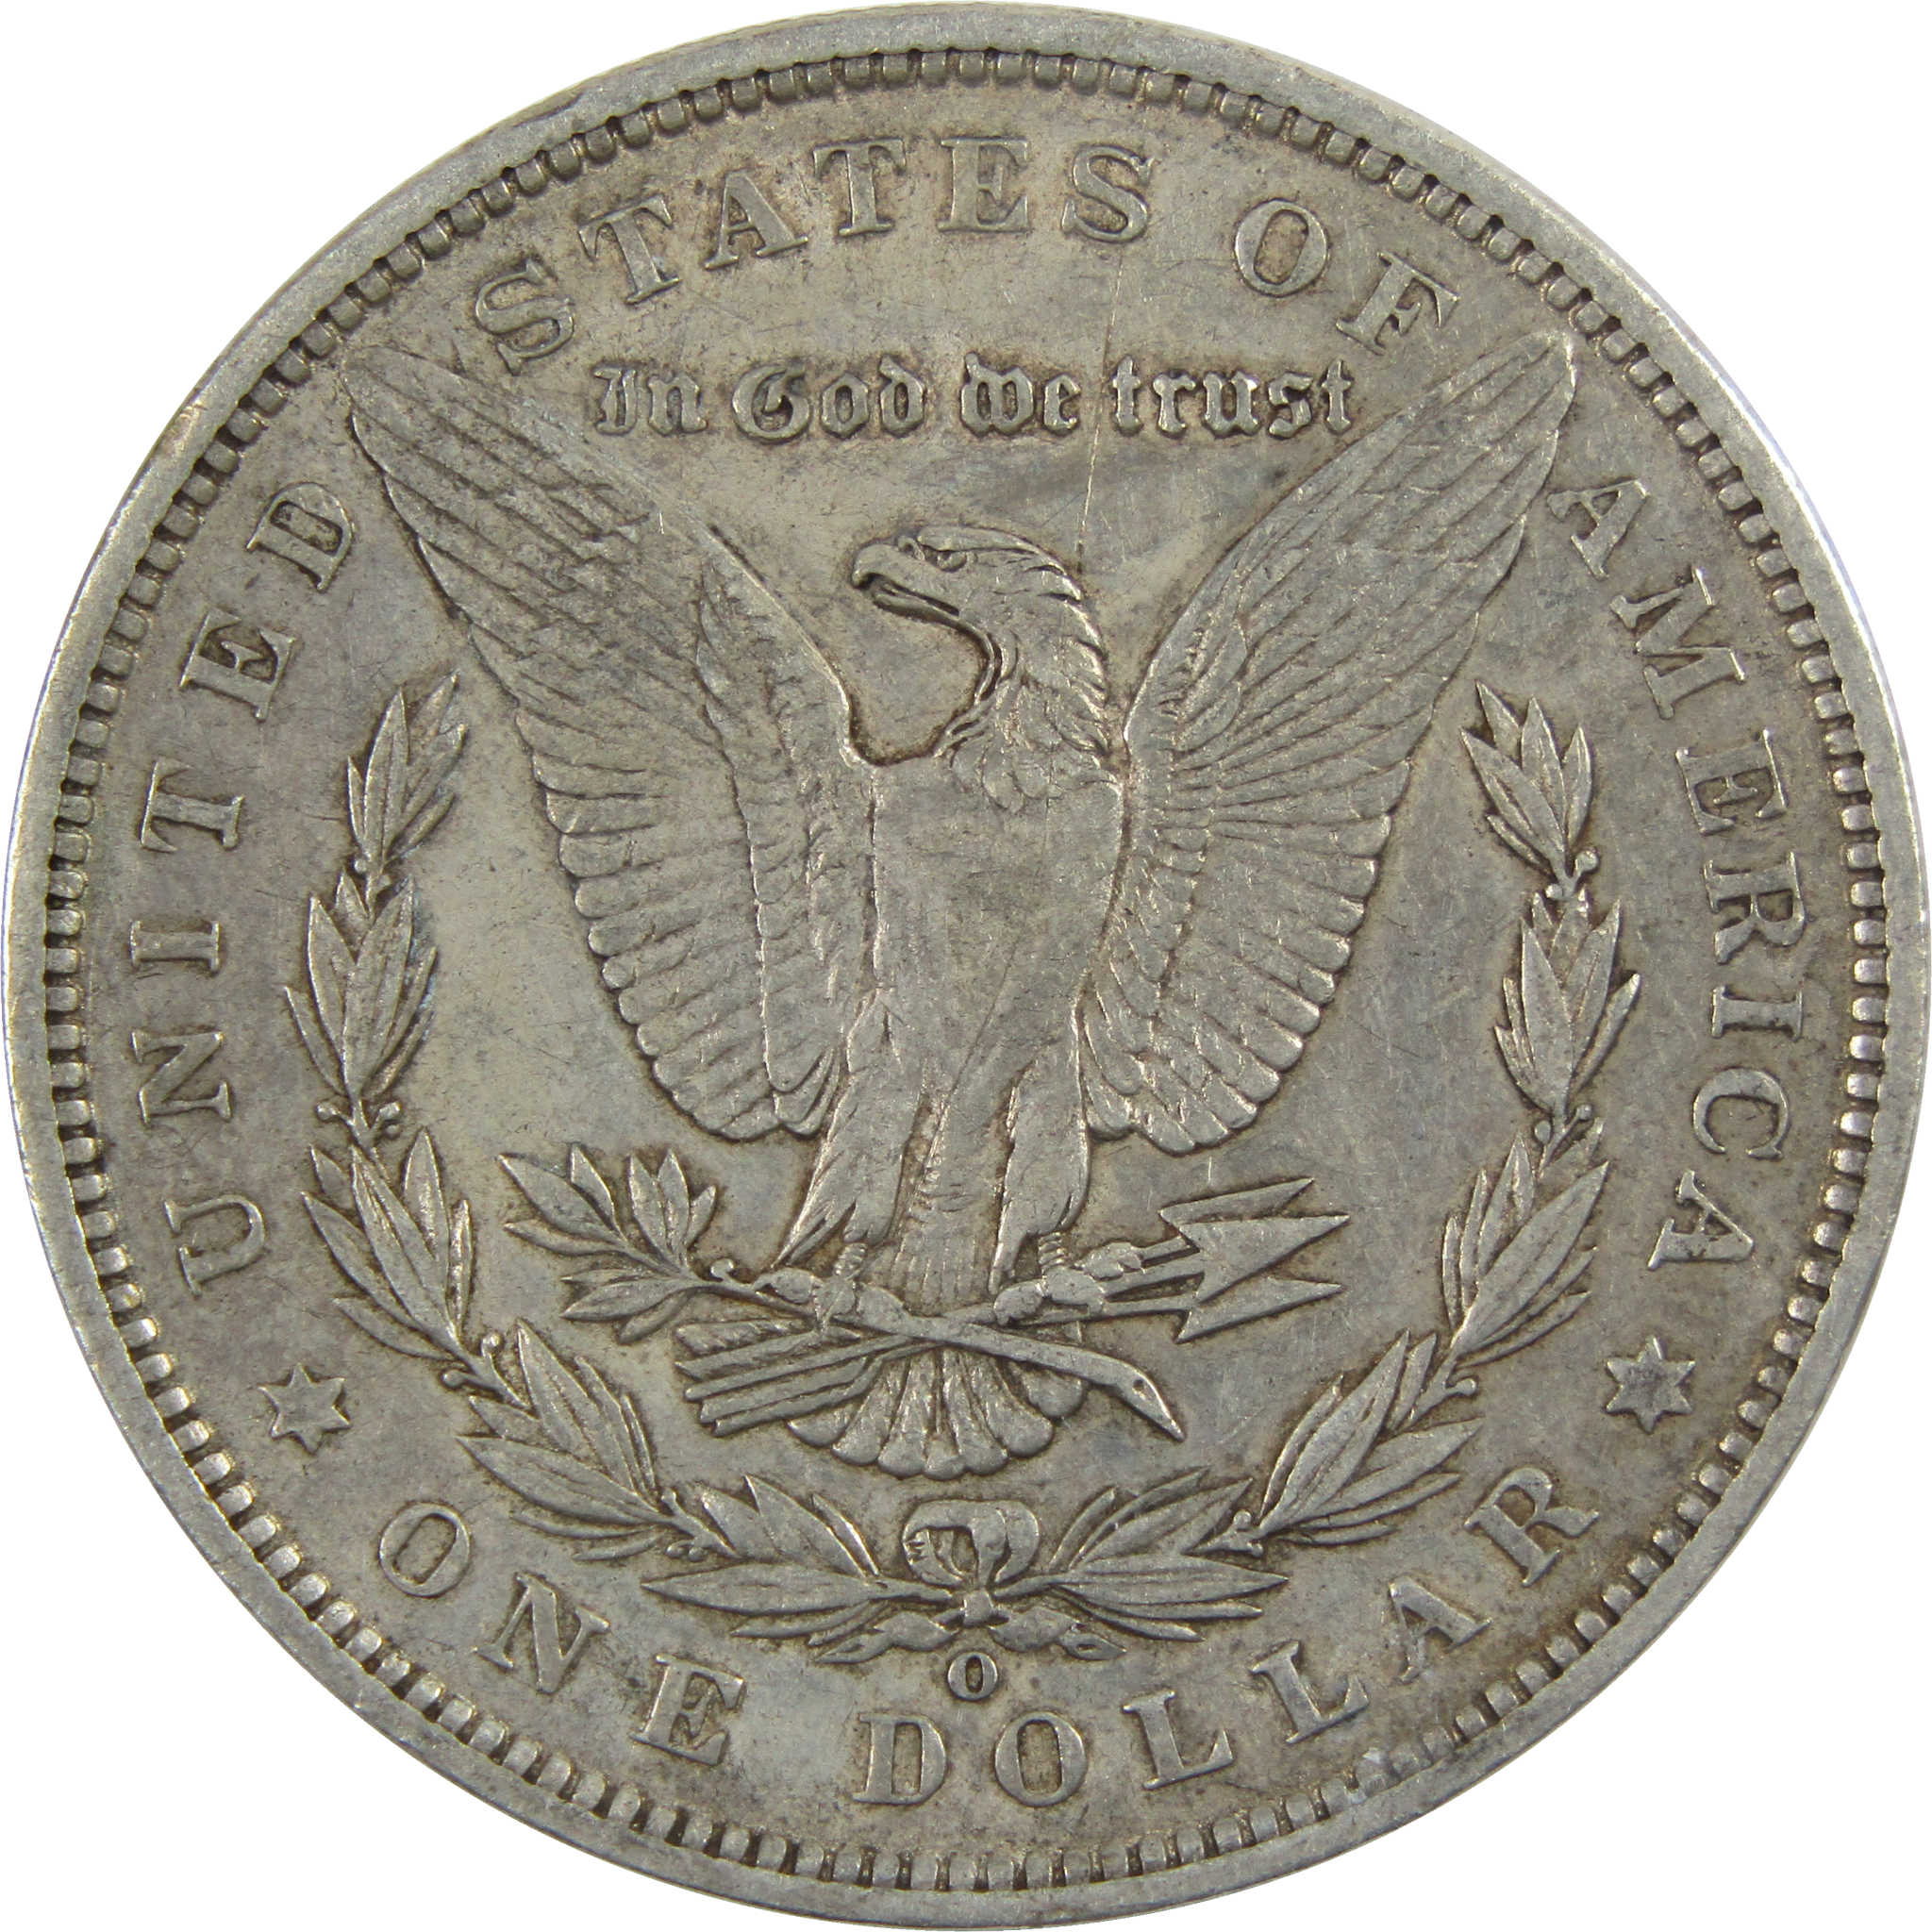 1891 O Morgan Dollar XF EF Extremely Fine 90% Silver $1 Coin SKU:I6055 - Morgan coin - Morgan silver dollar - Morgan silver dollar for sale - Profile Coins &amp; Collectibles